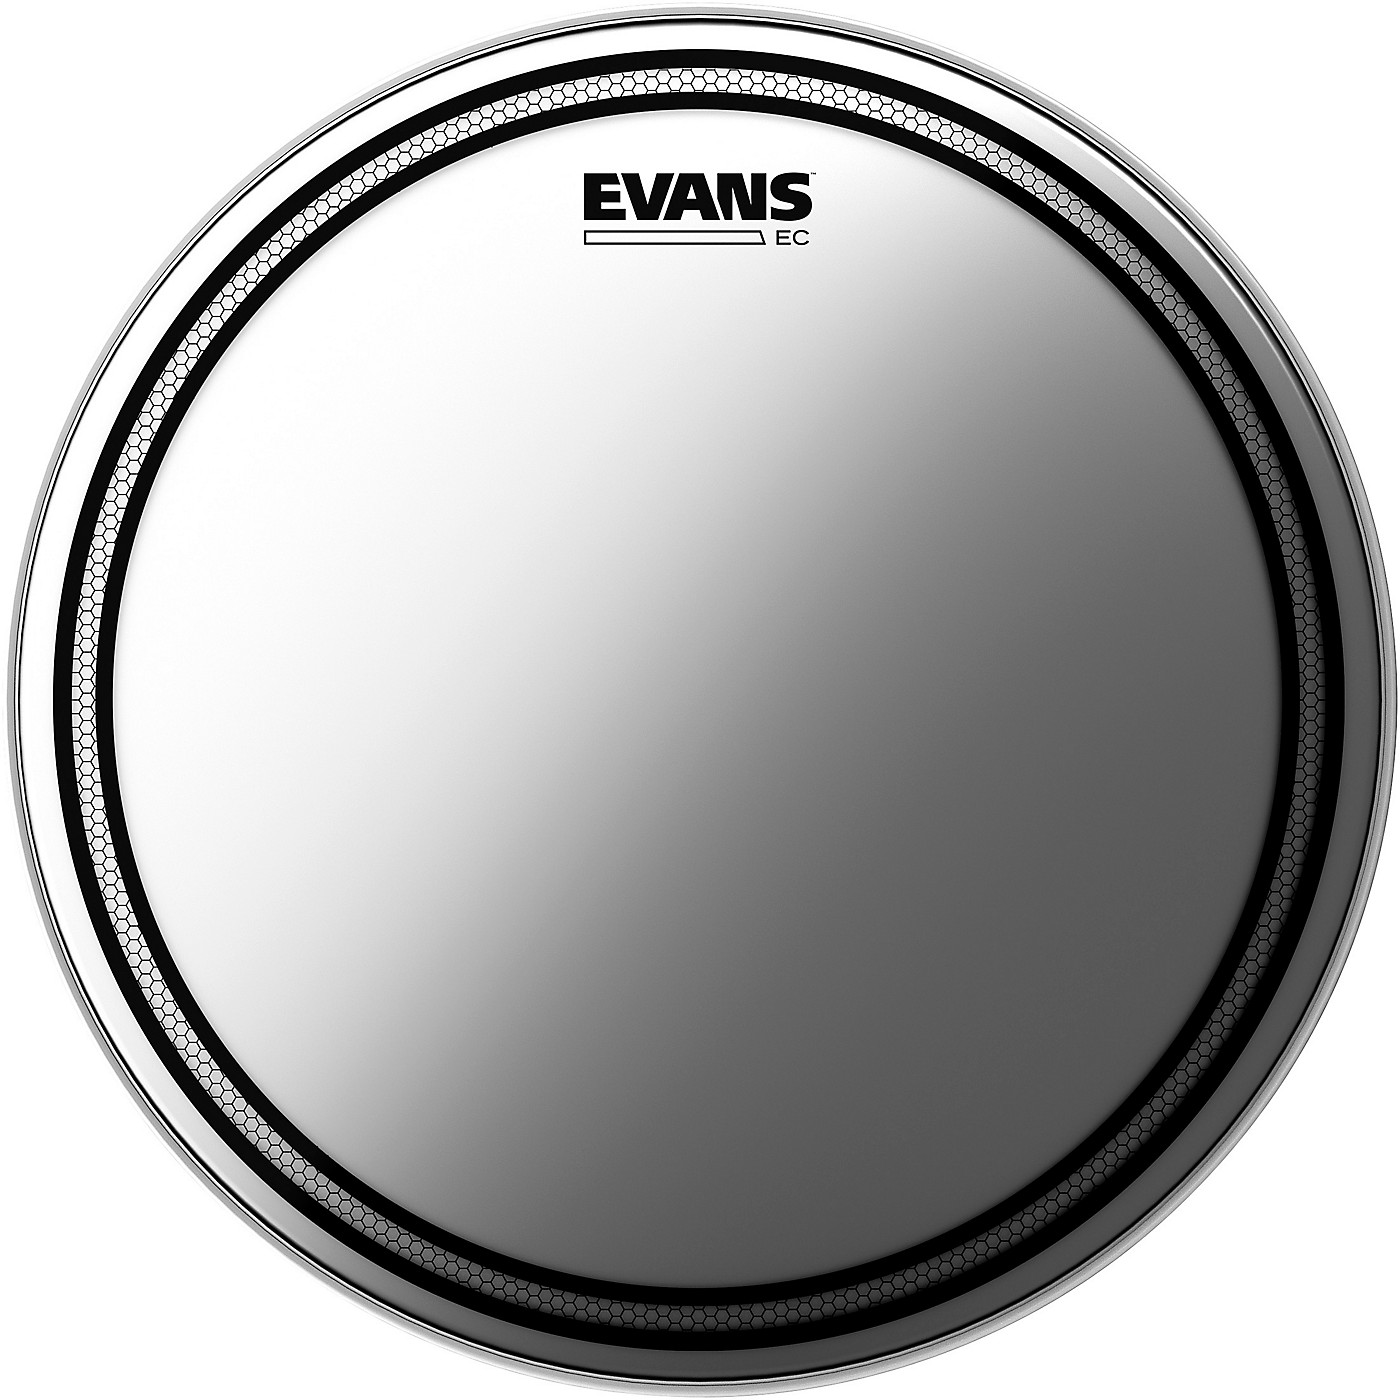 Evans EC Snare Frosted Batter Head thumbnail